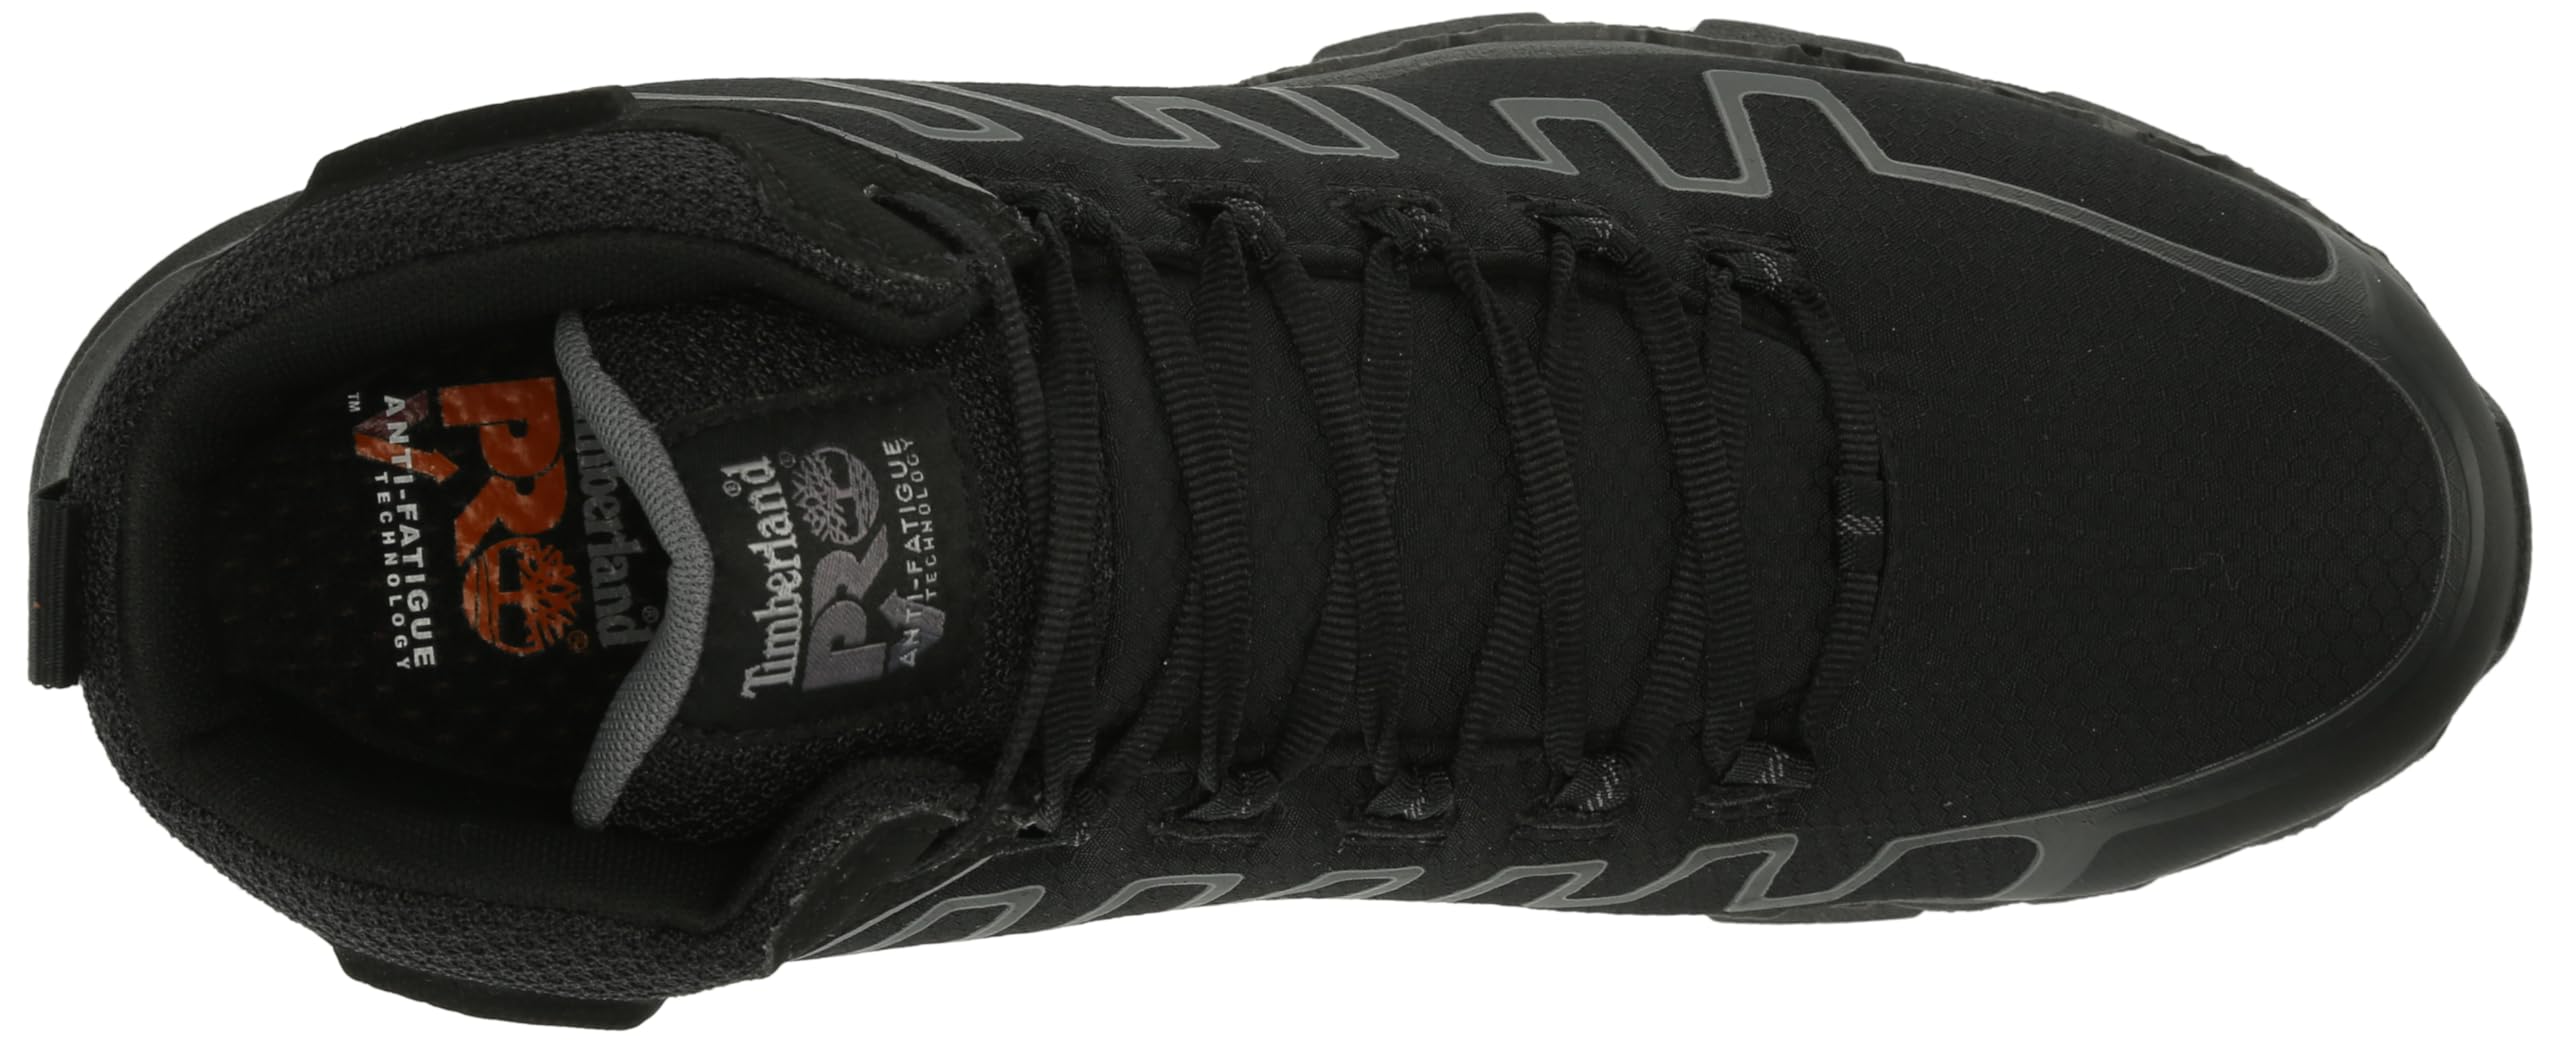 Timberland PRO Men's Powertrain Sport Mid Alloy Safety Toe Athletic Industrial Work Shoe